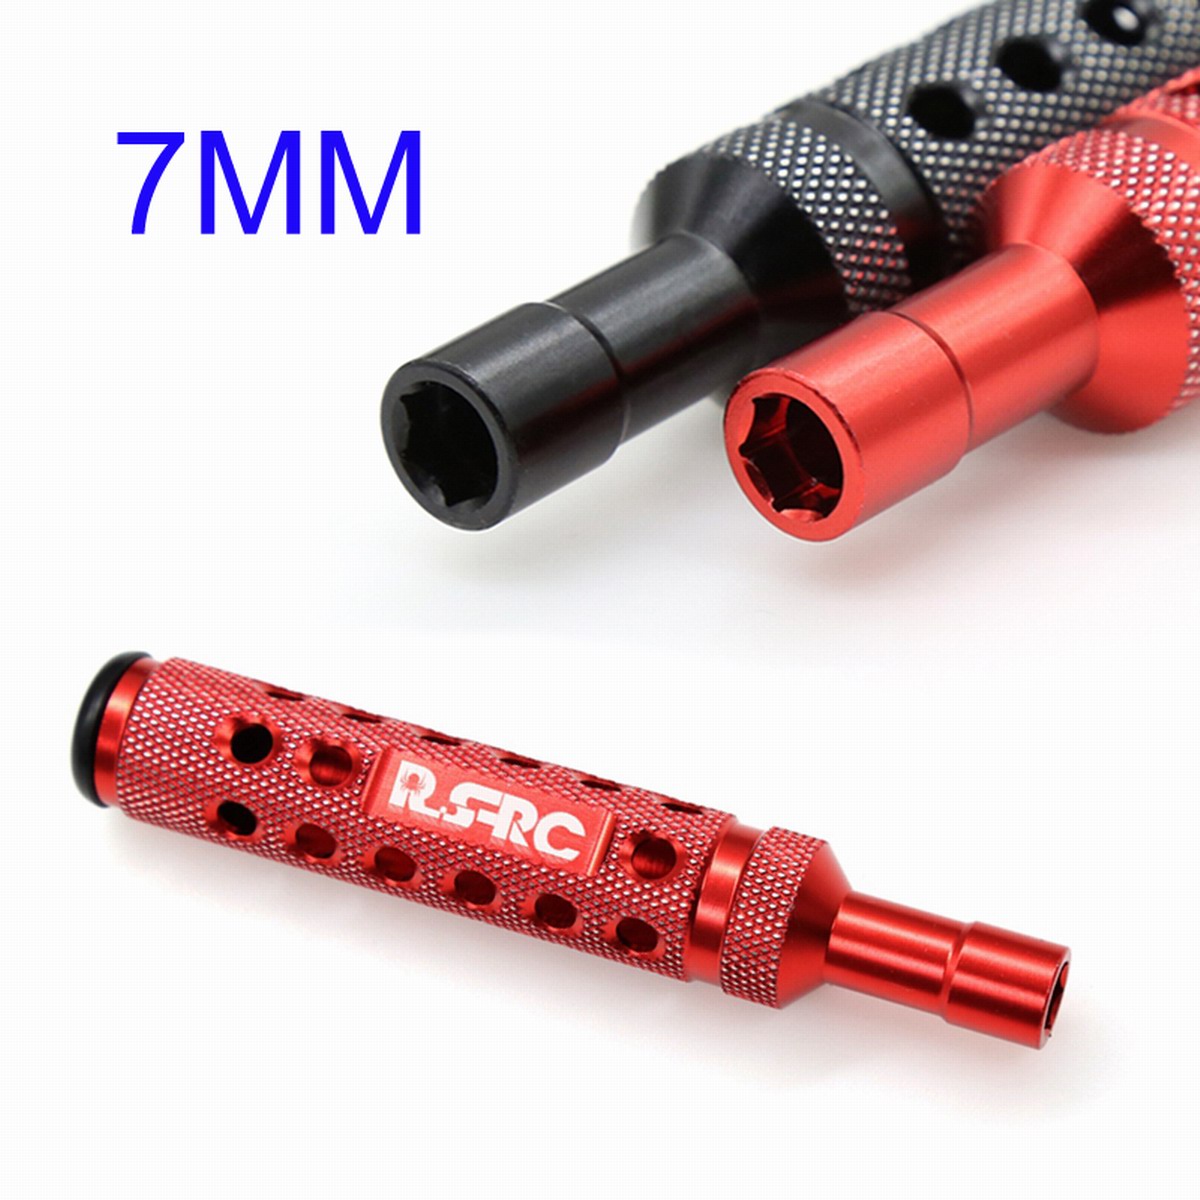 7 MM Socket Wrench Hex Screwdriver Tool For M4 Lock Nut RC Car Drone Spanner Hex Socket HUDY Quadcopter FPV Drone UAV